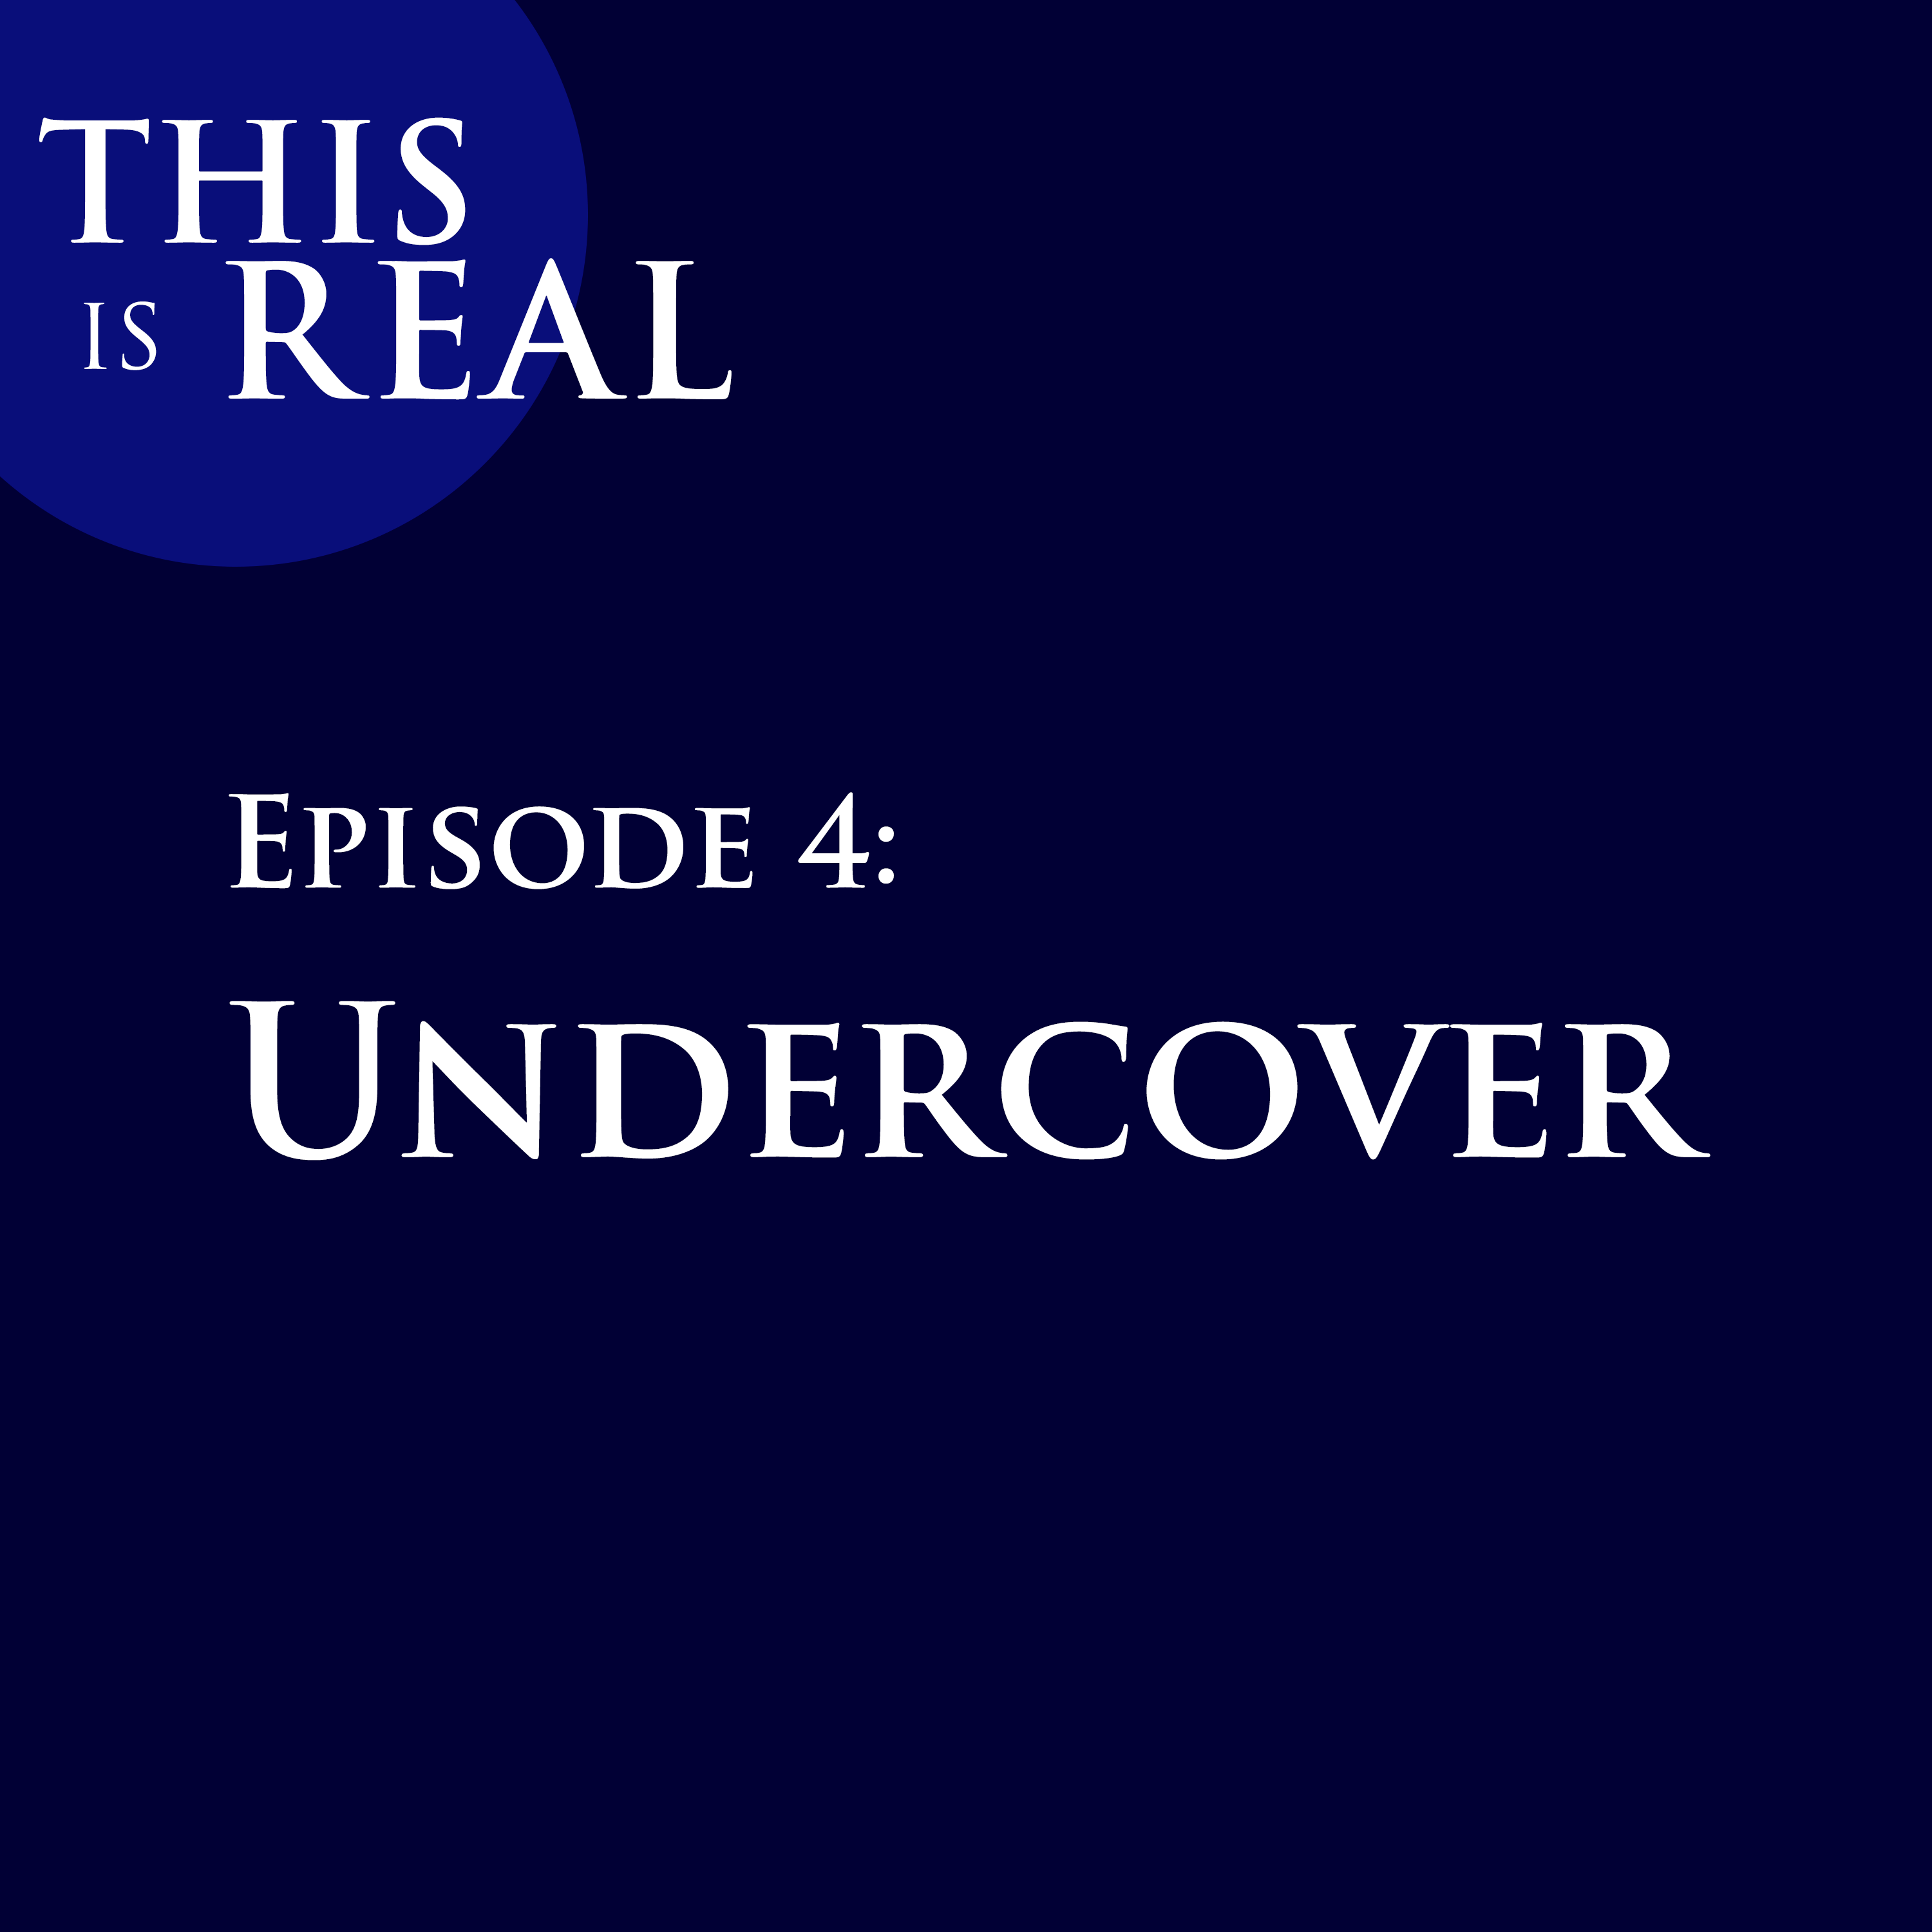 This is Real Episode 4: Undercover